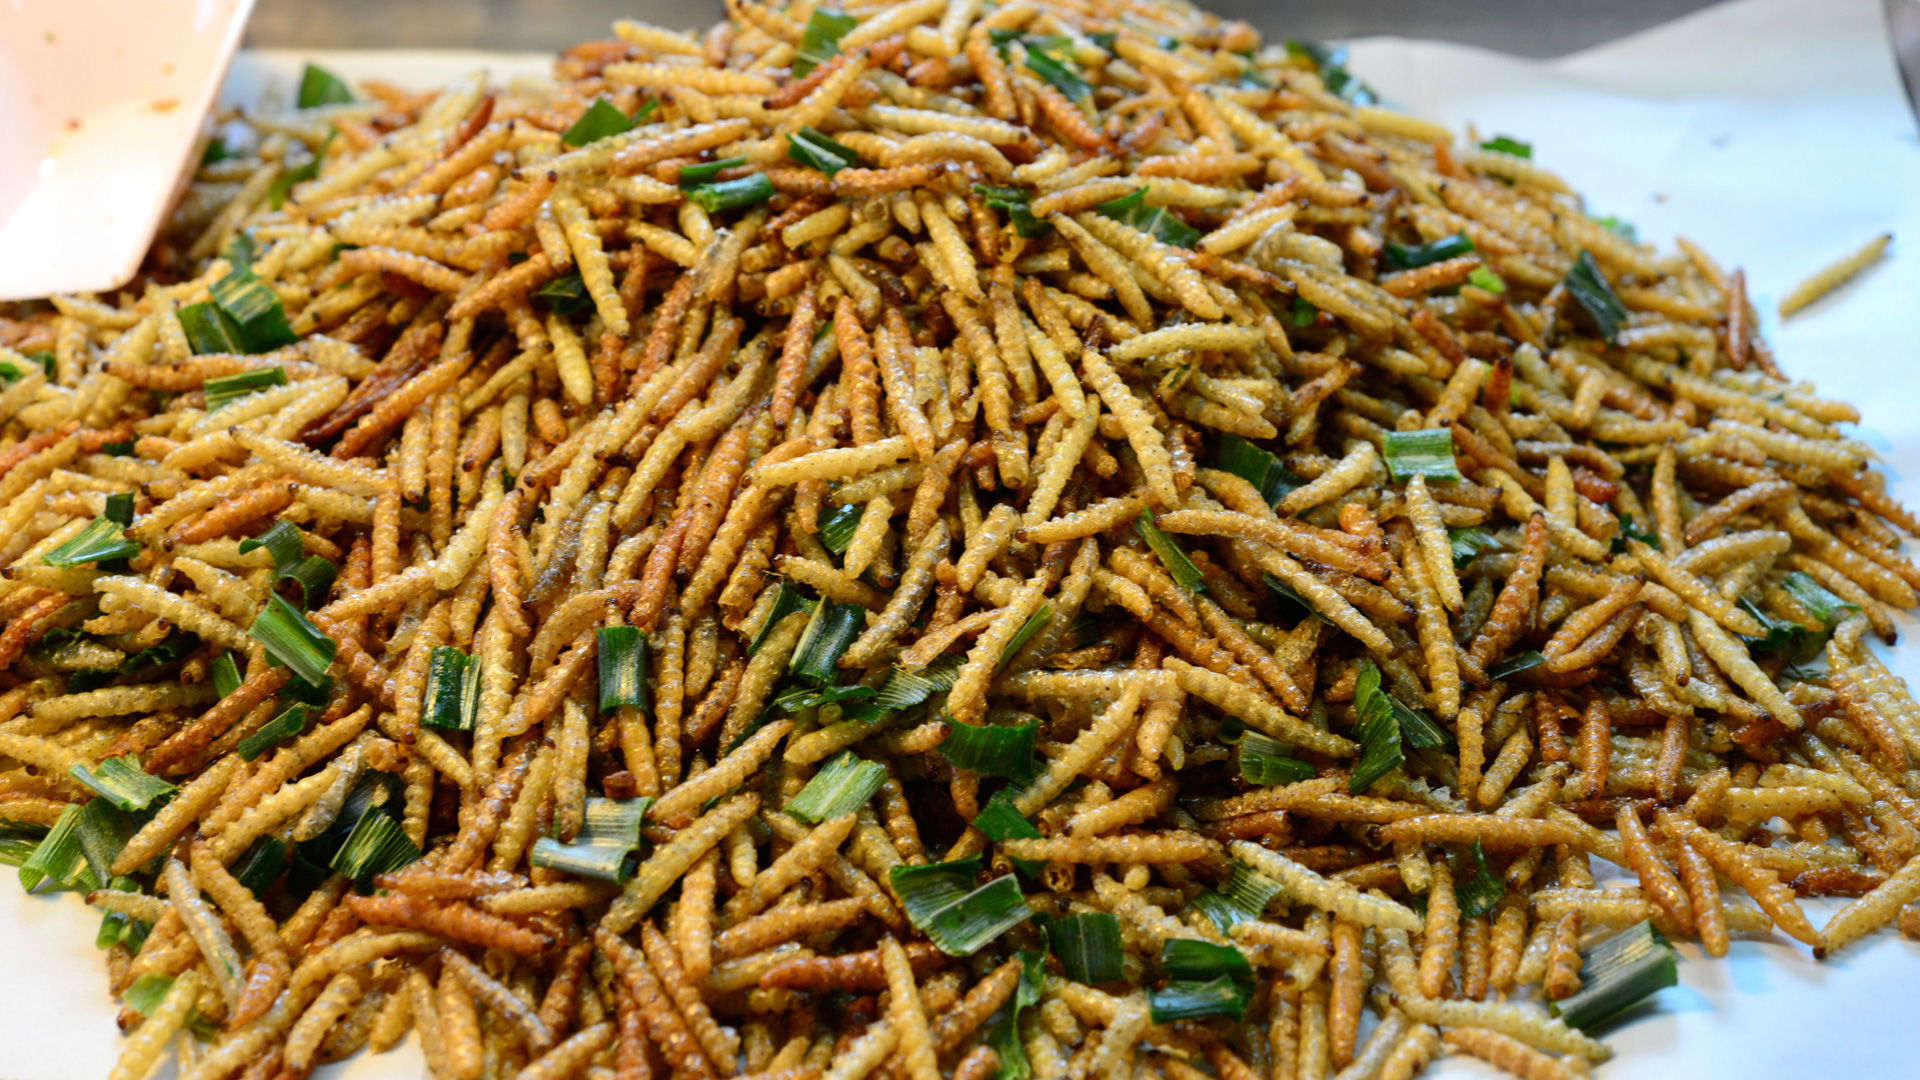 swedish-govt-spends-millions-telling-citizens-to-eat-insect-meat-to